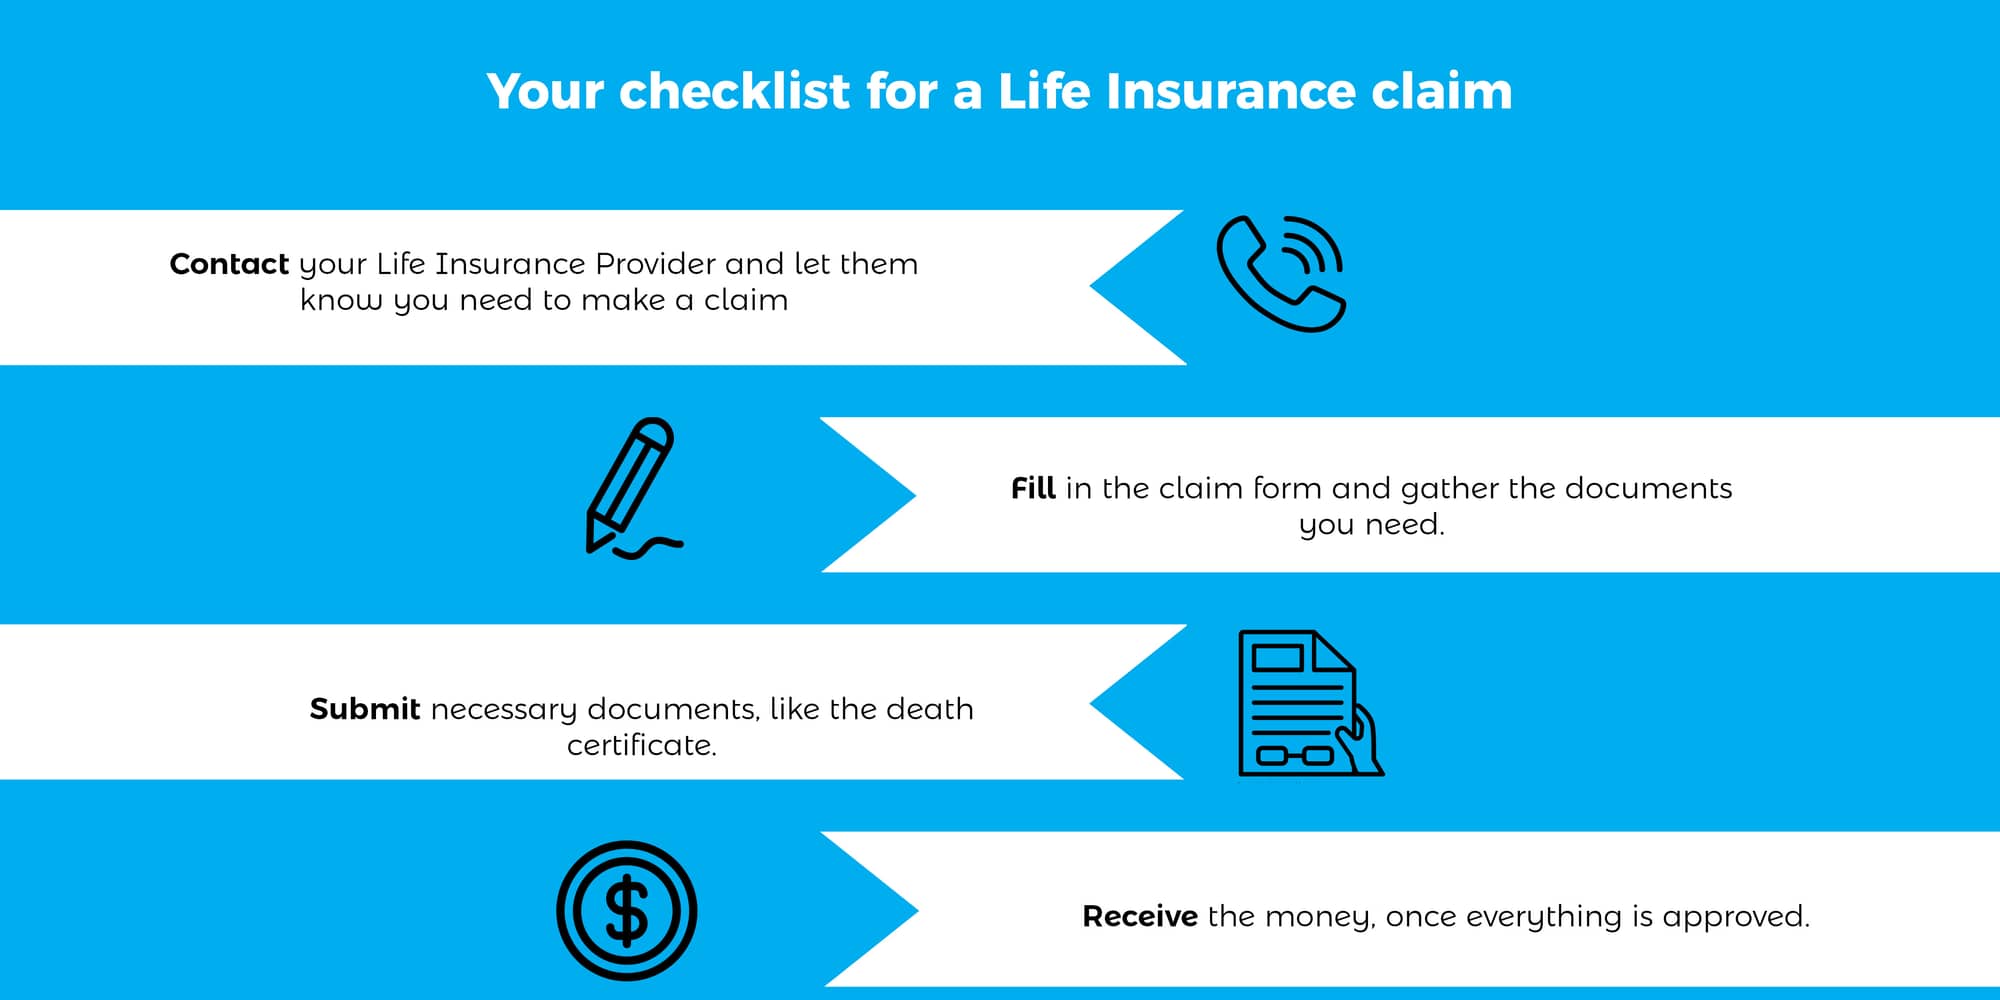 Top tips to getting your life insurance money quickly